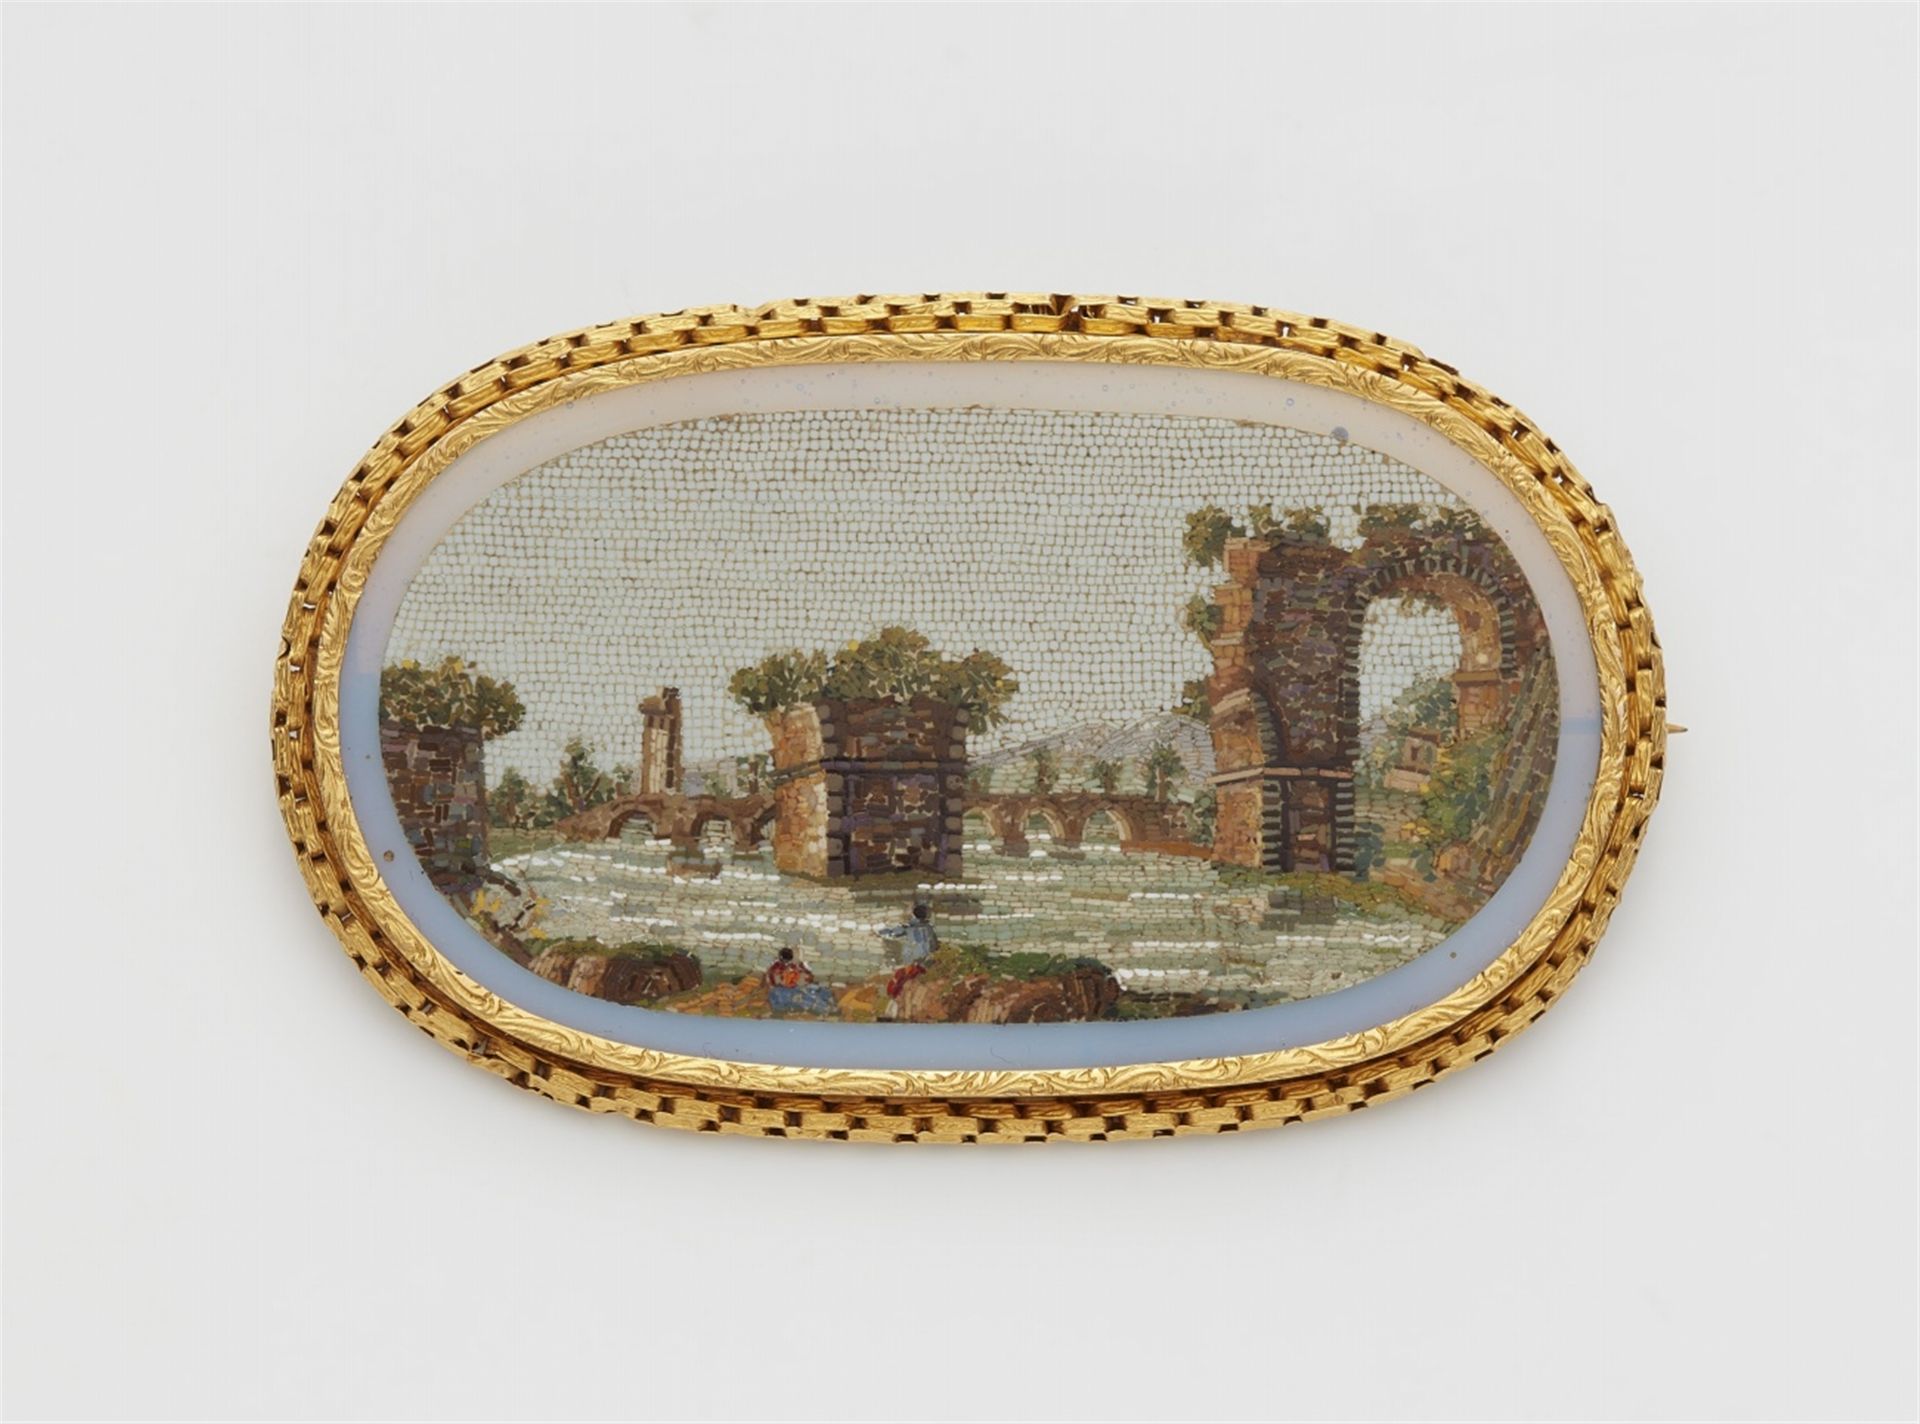 An 18k gold and Roman micromosaic brooch depicting the ruins of the ponte d'Augusto in Narni